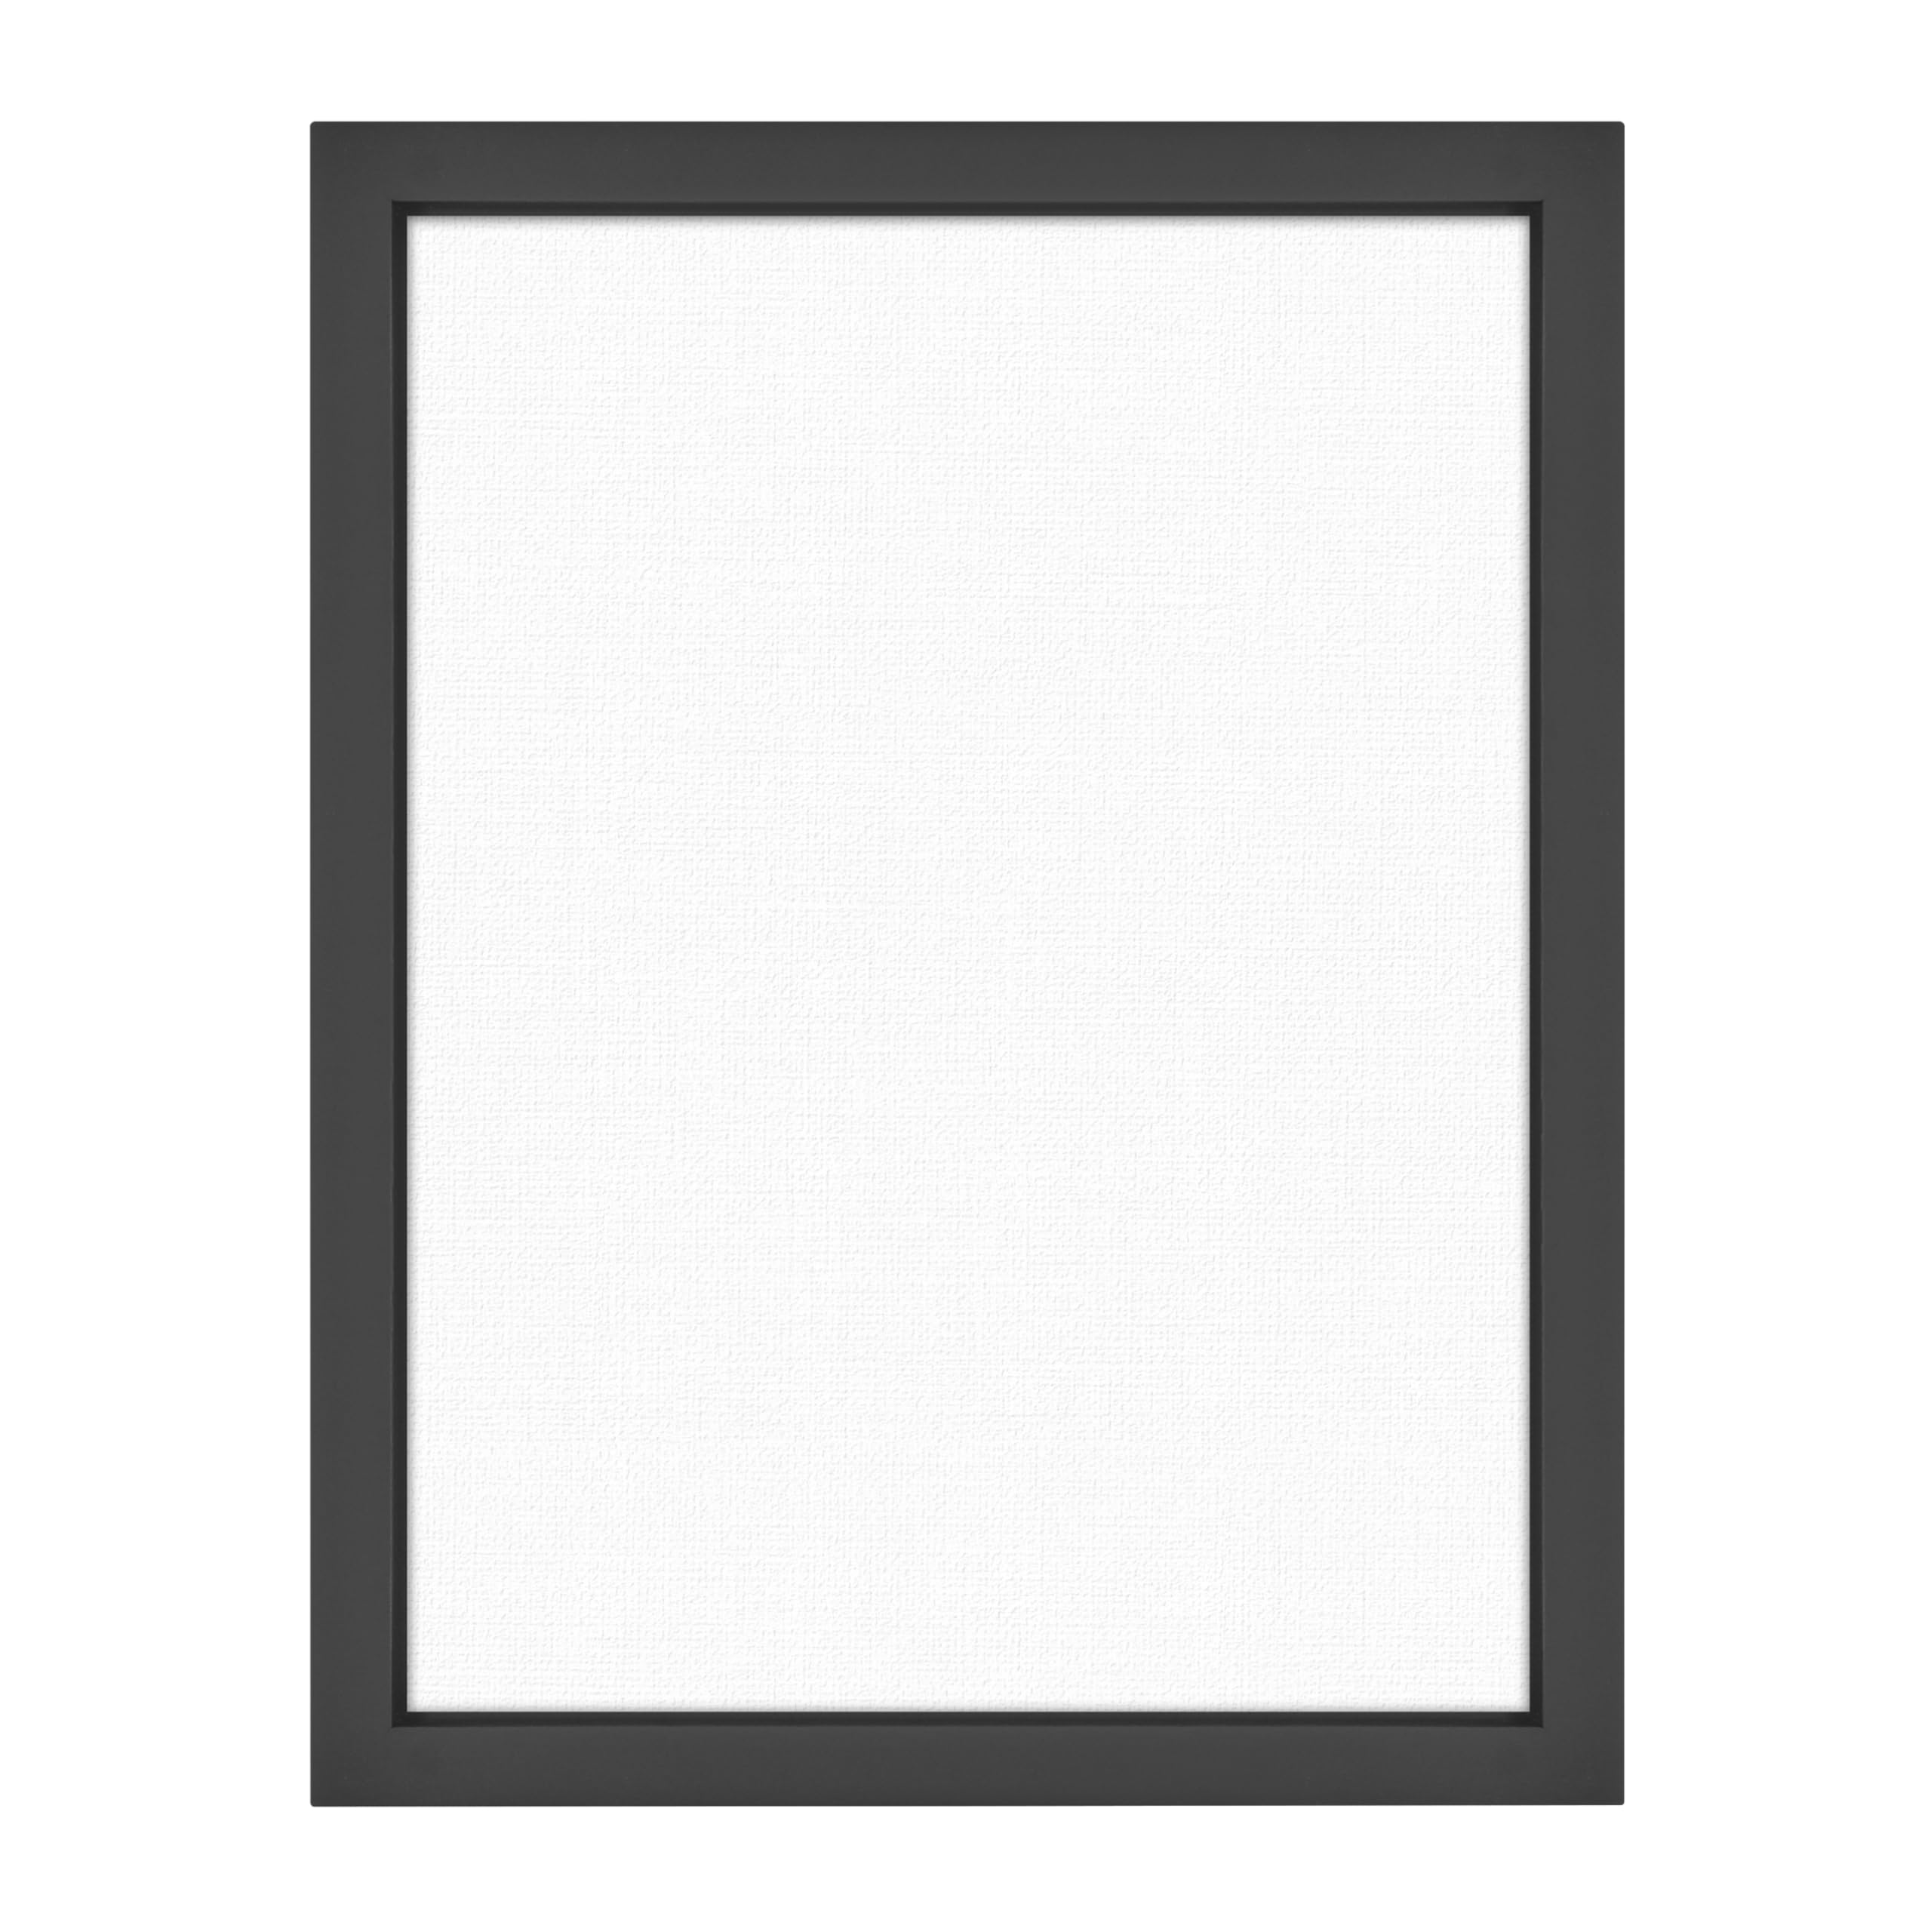 MCS Floating Frame with Canvas Included, Art Frames for Canvas Paintings with Adhesive Fasteners and Hanging Hardware, Black, 9 x 12 Inch